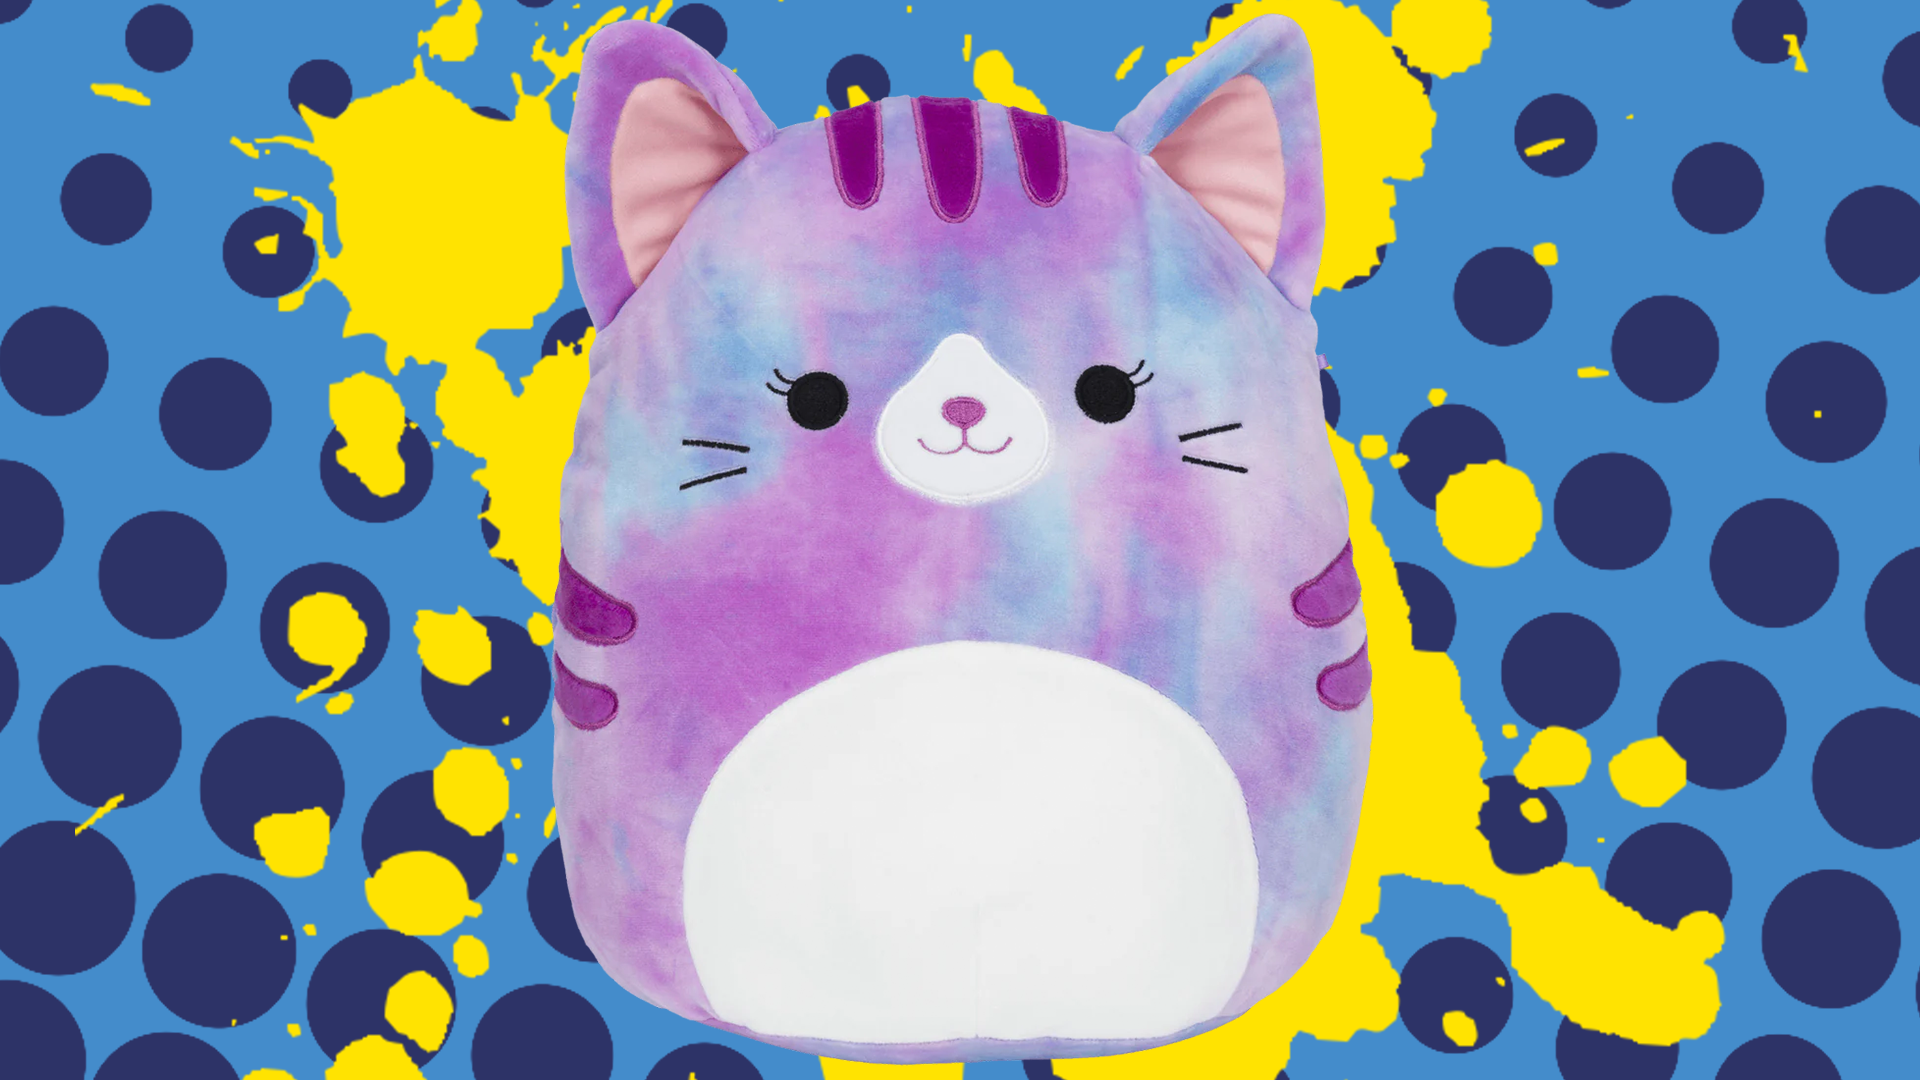 Cat squishmallow on splats and dots background